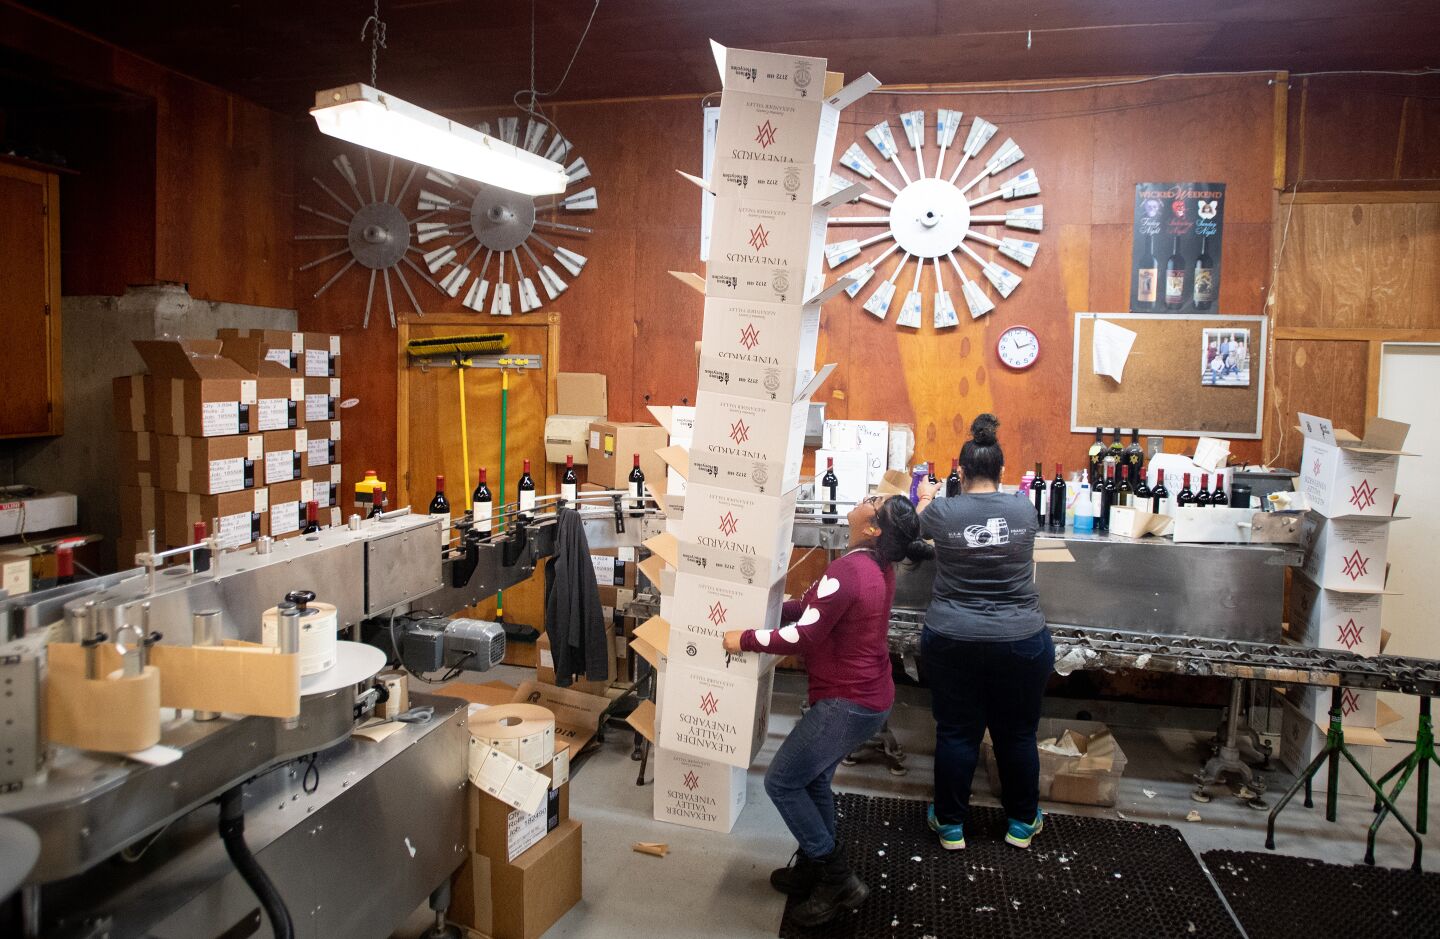 A cellar worker carries a stack of boxes on the production line at Alexander Valley Vineyards. Hank Wetzel had never sought to export wines until he visited China two years ago.